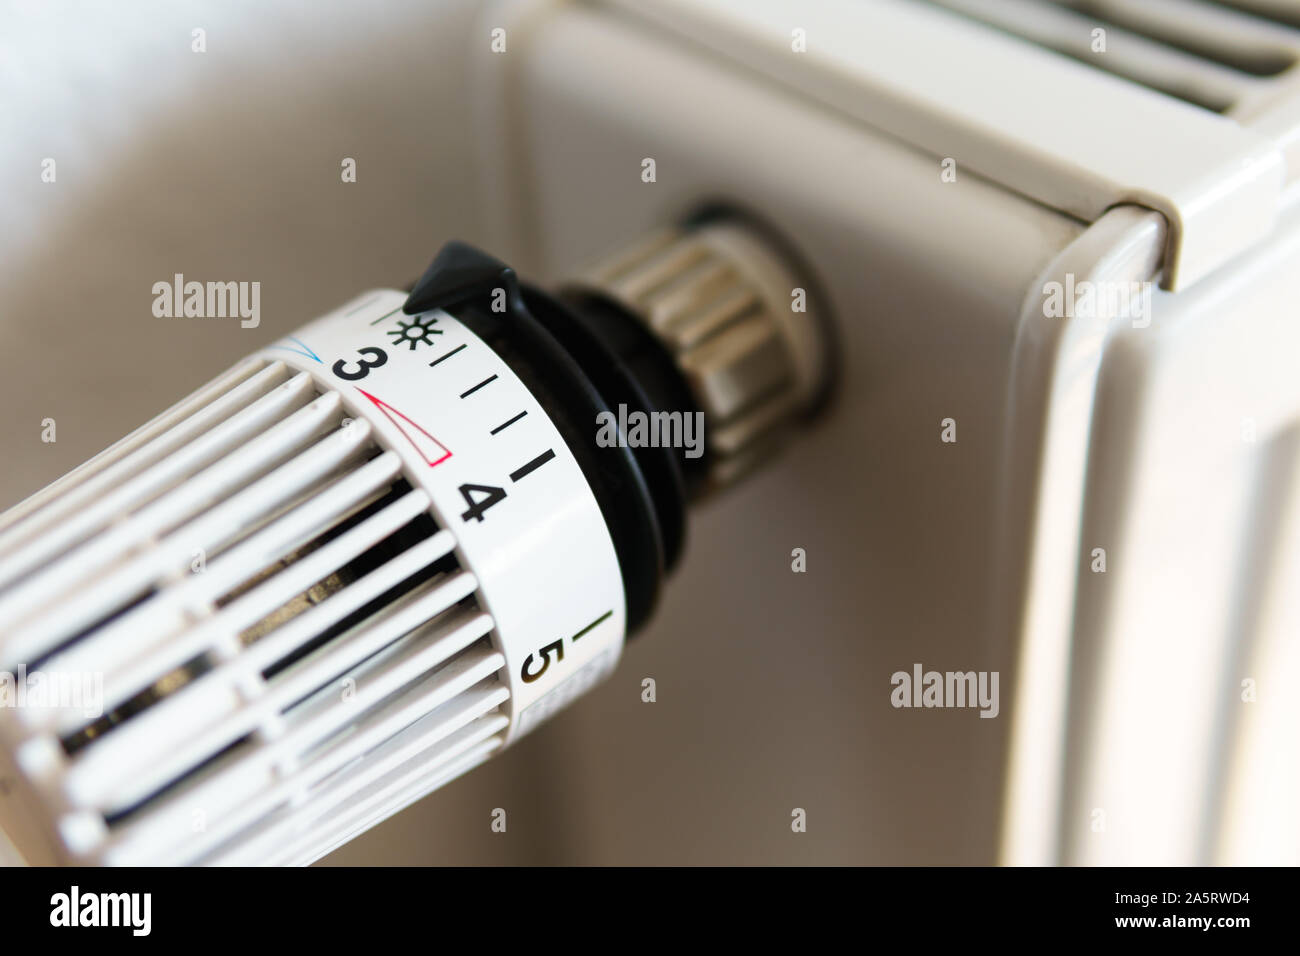 Radiator thermostat valve set to number three icon (middle position), symbol for saving money at heating costs or medium temperature setting, closeup Stock Photo